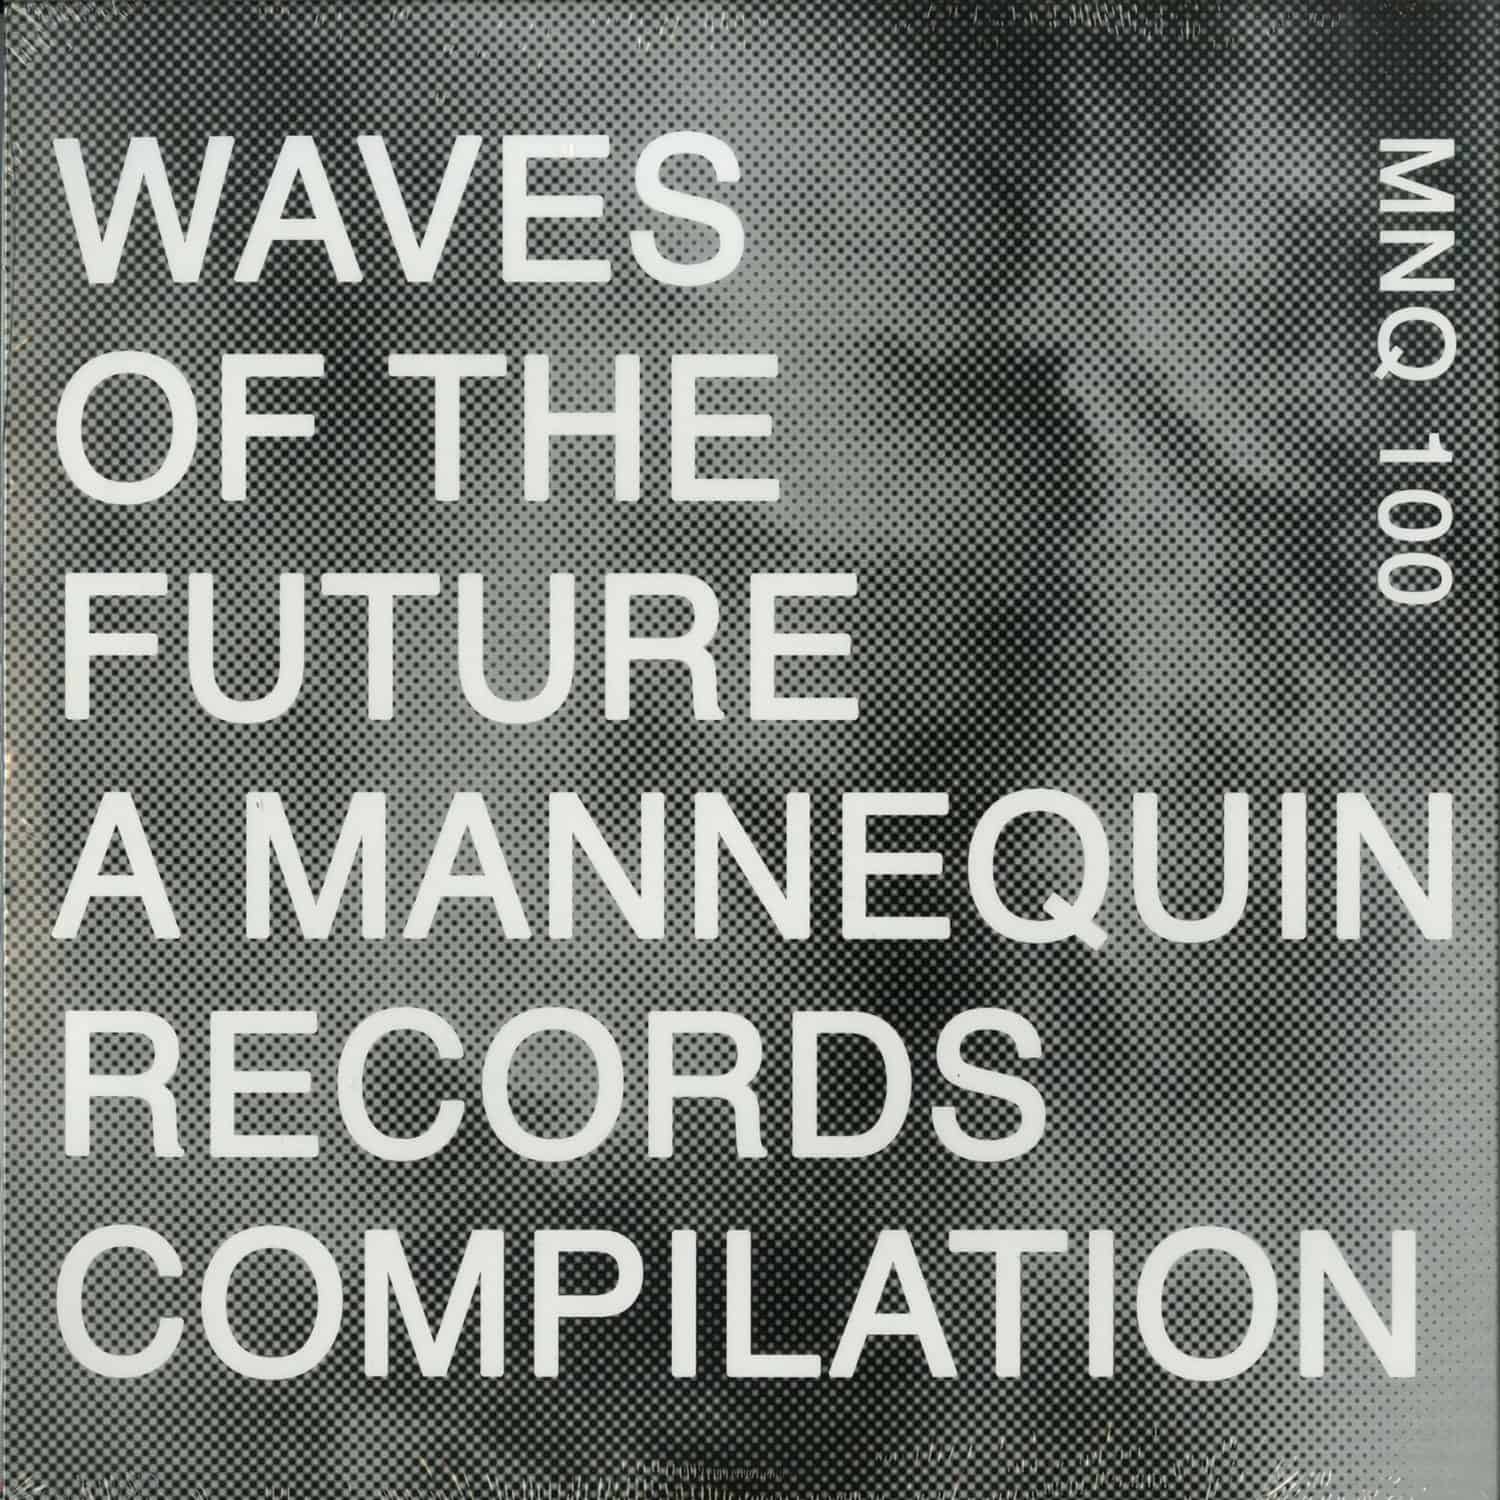 Various Artists - WAVES OF THE FUTURE COMPILATION 